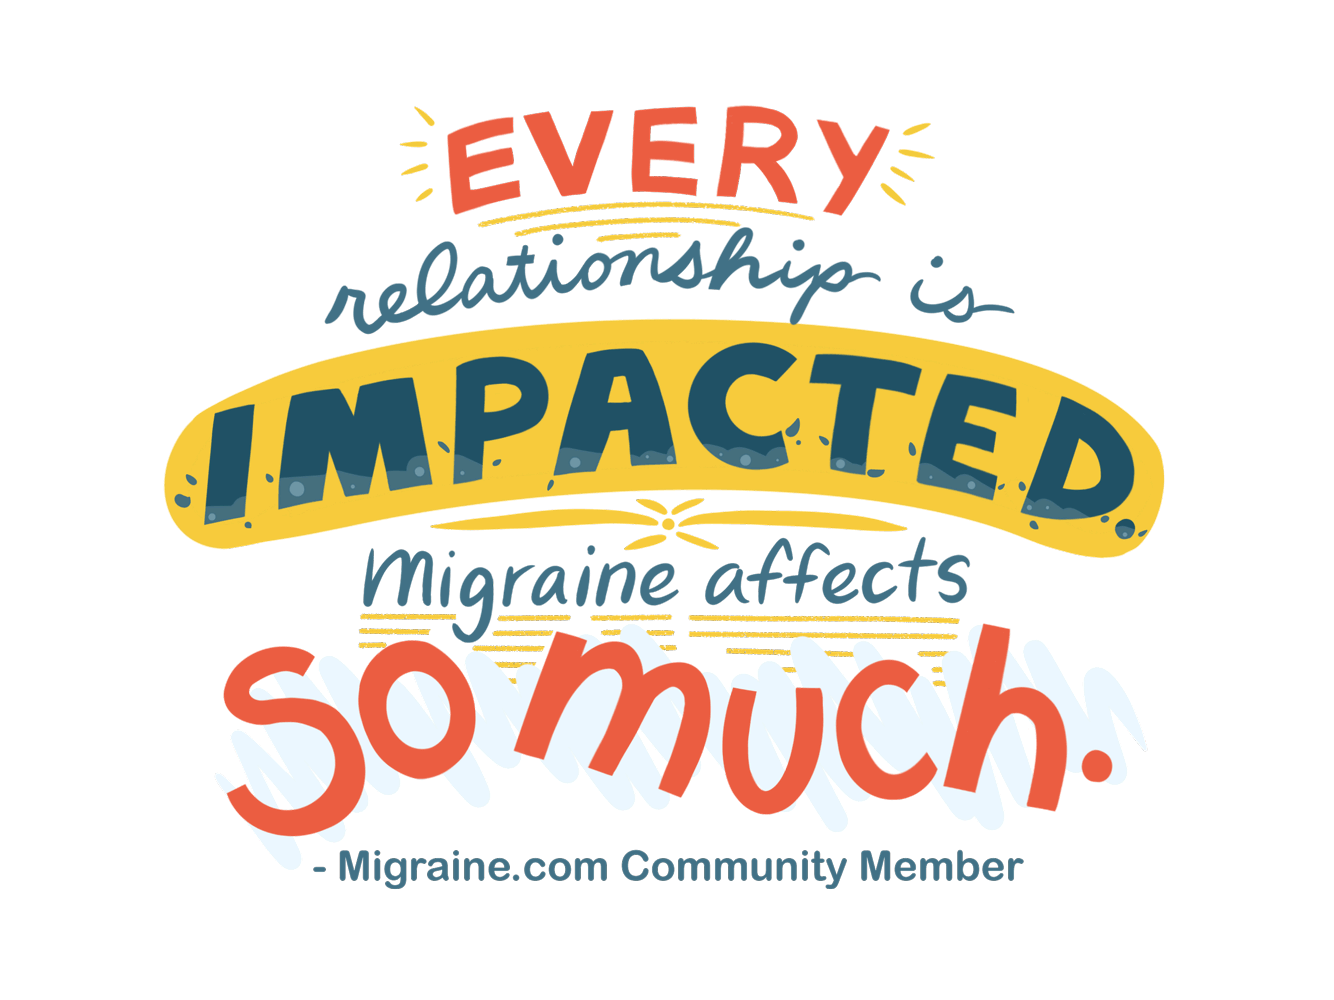 Every relationship is impacted. Migraine affects so much. -Migraine.com Community Member